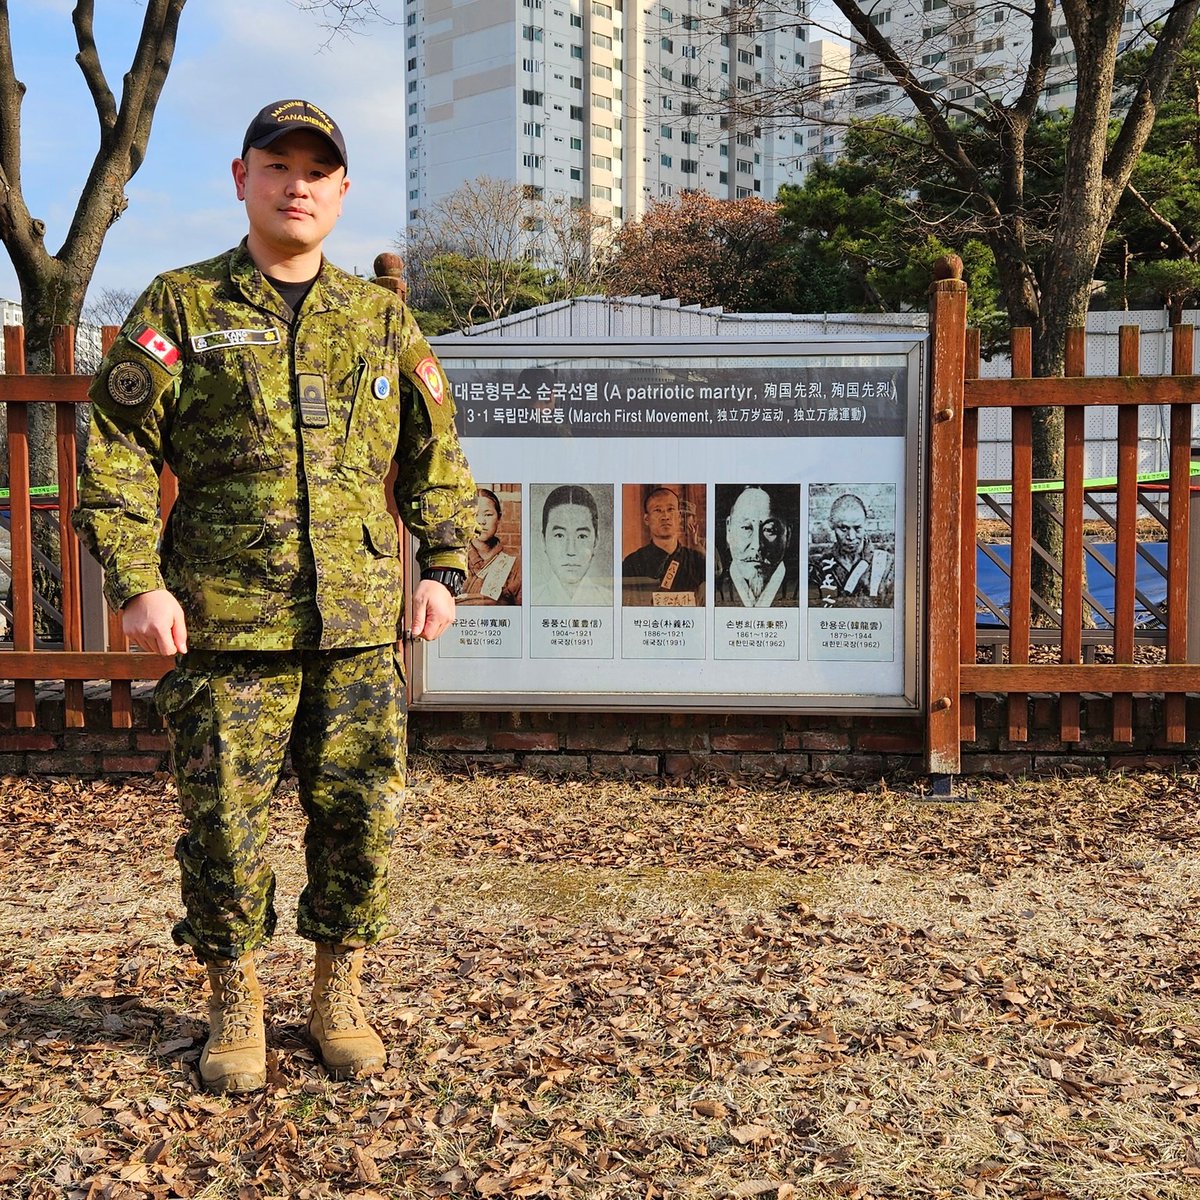 “I will continue to protect the values of freedom and independence that my great-grandfather died for 105 years ago.” LCdr Bob Kang paid tribute to Pak Ui-song, a leader in Korea’s 1919 March 1 Independence Movement, during his visit to Seodaemun Prison. #AHM2024 1/2